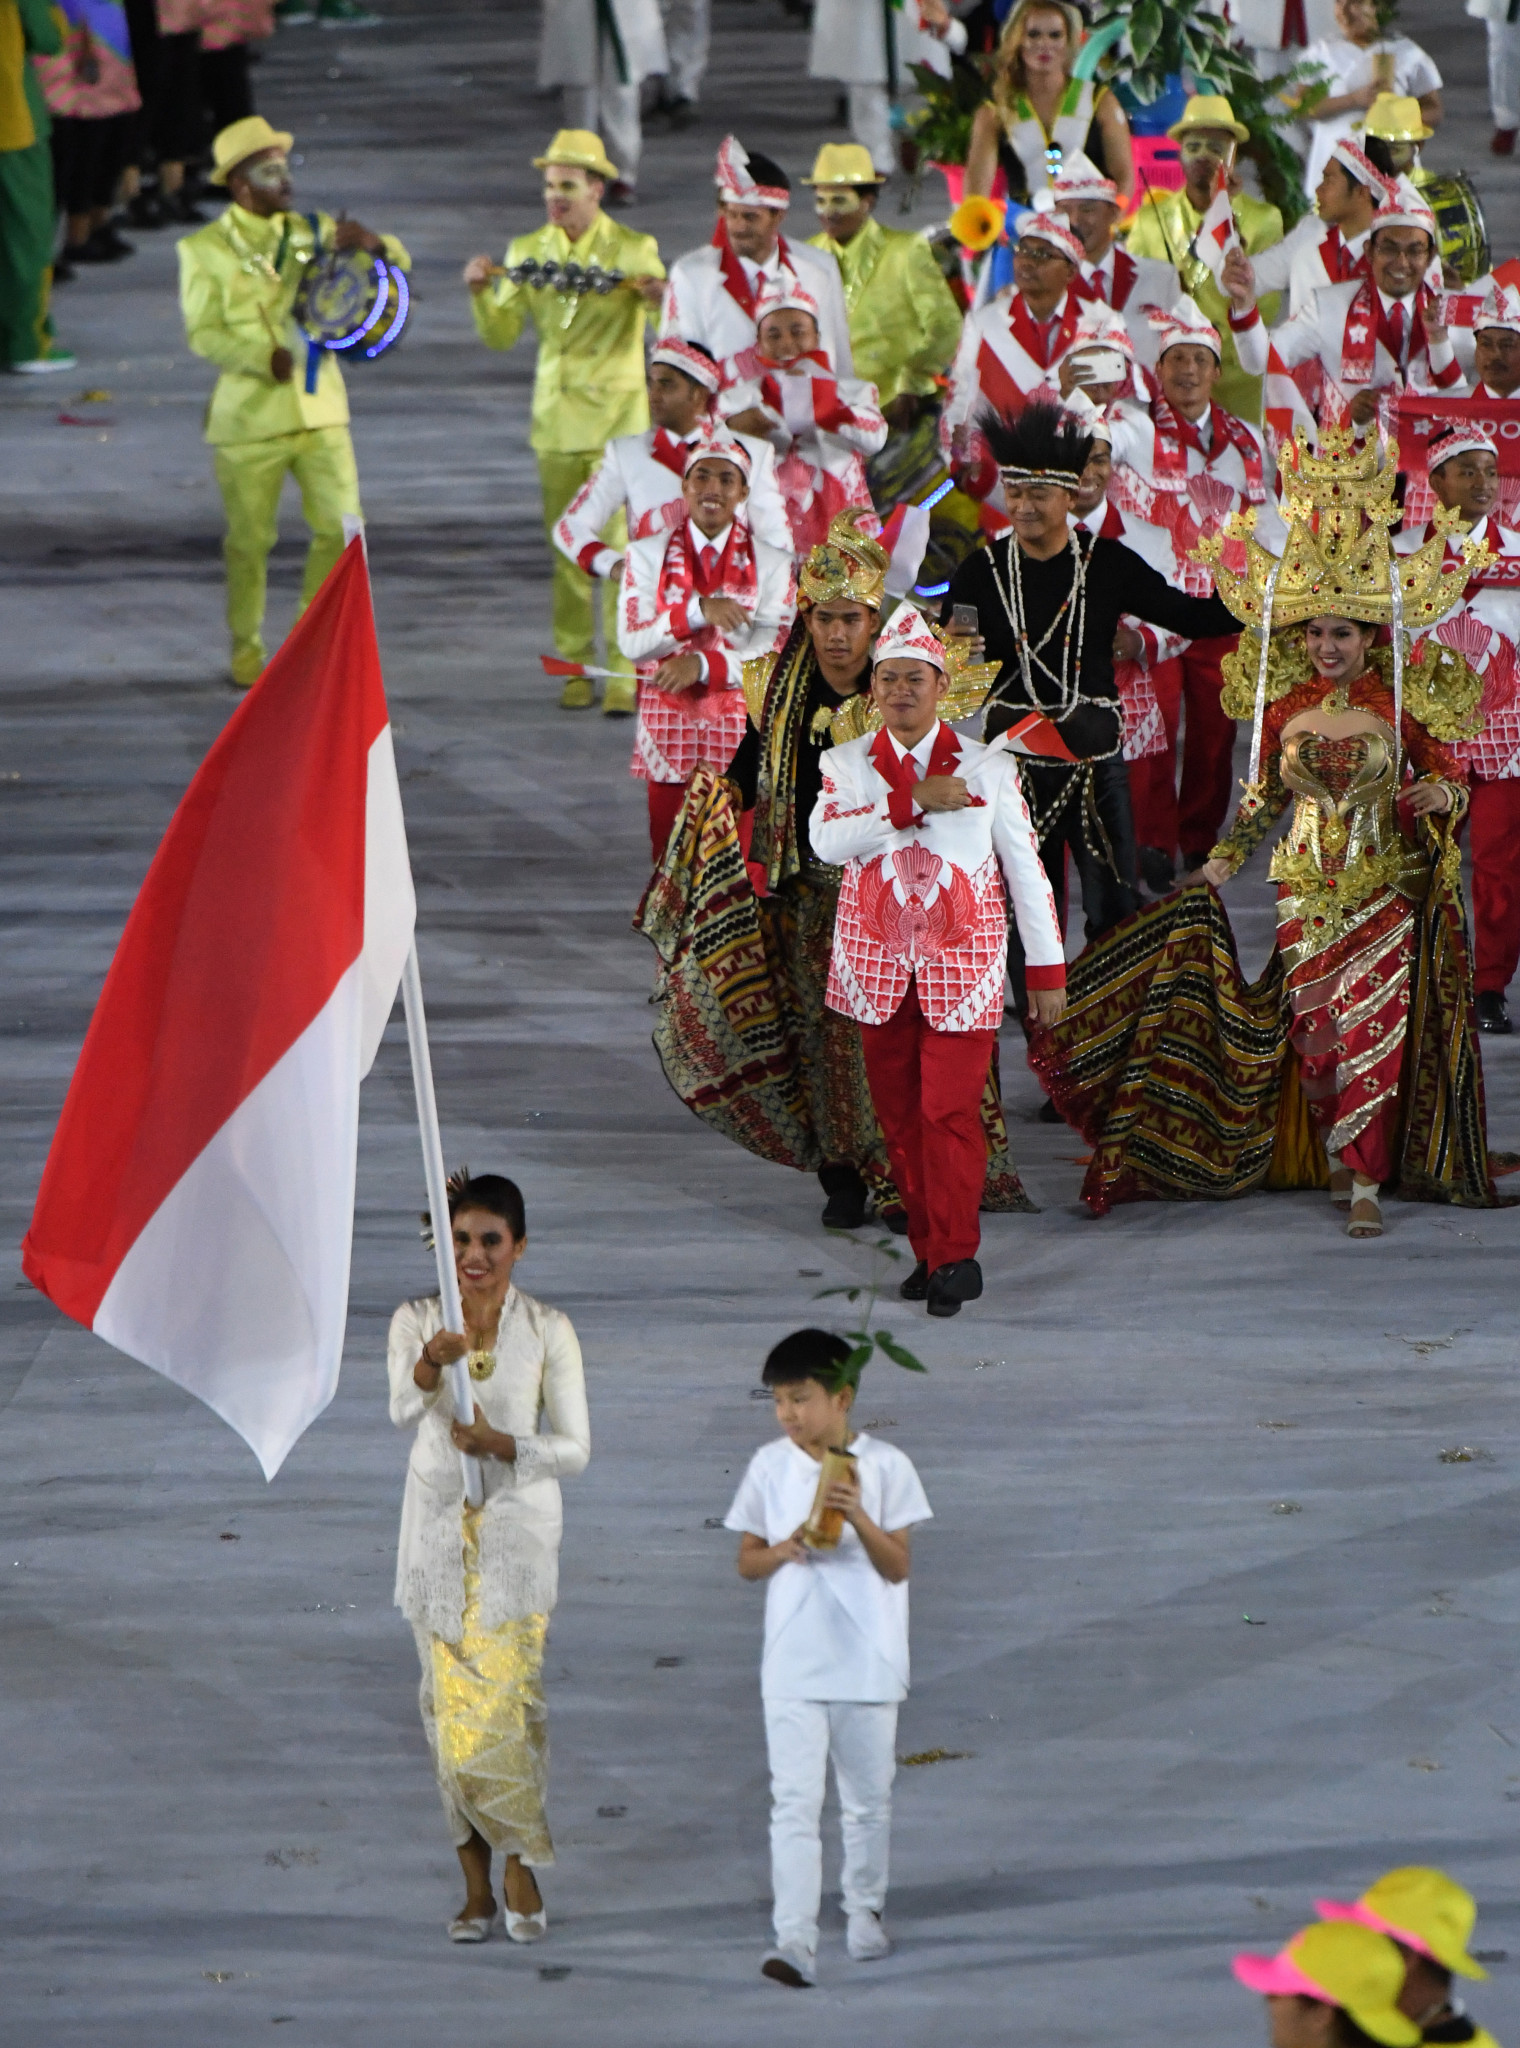 Indonesia sent 28 athletes to the Rio 2016 Olympic Games ©Getty Images